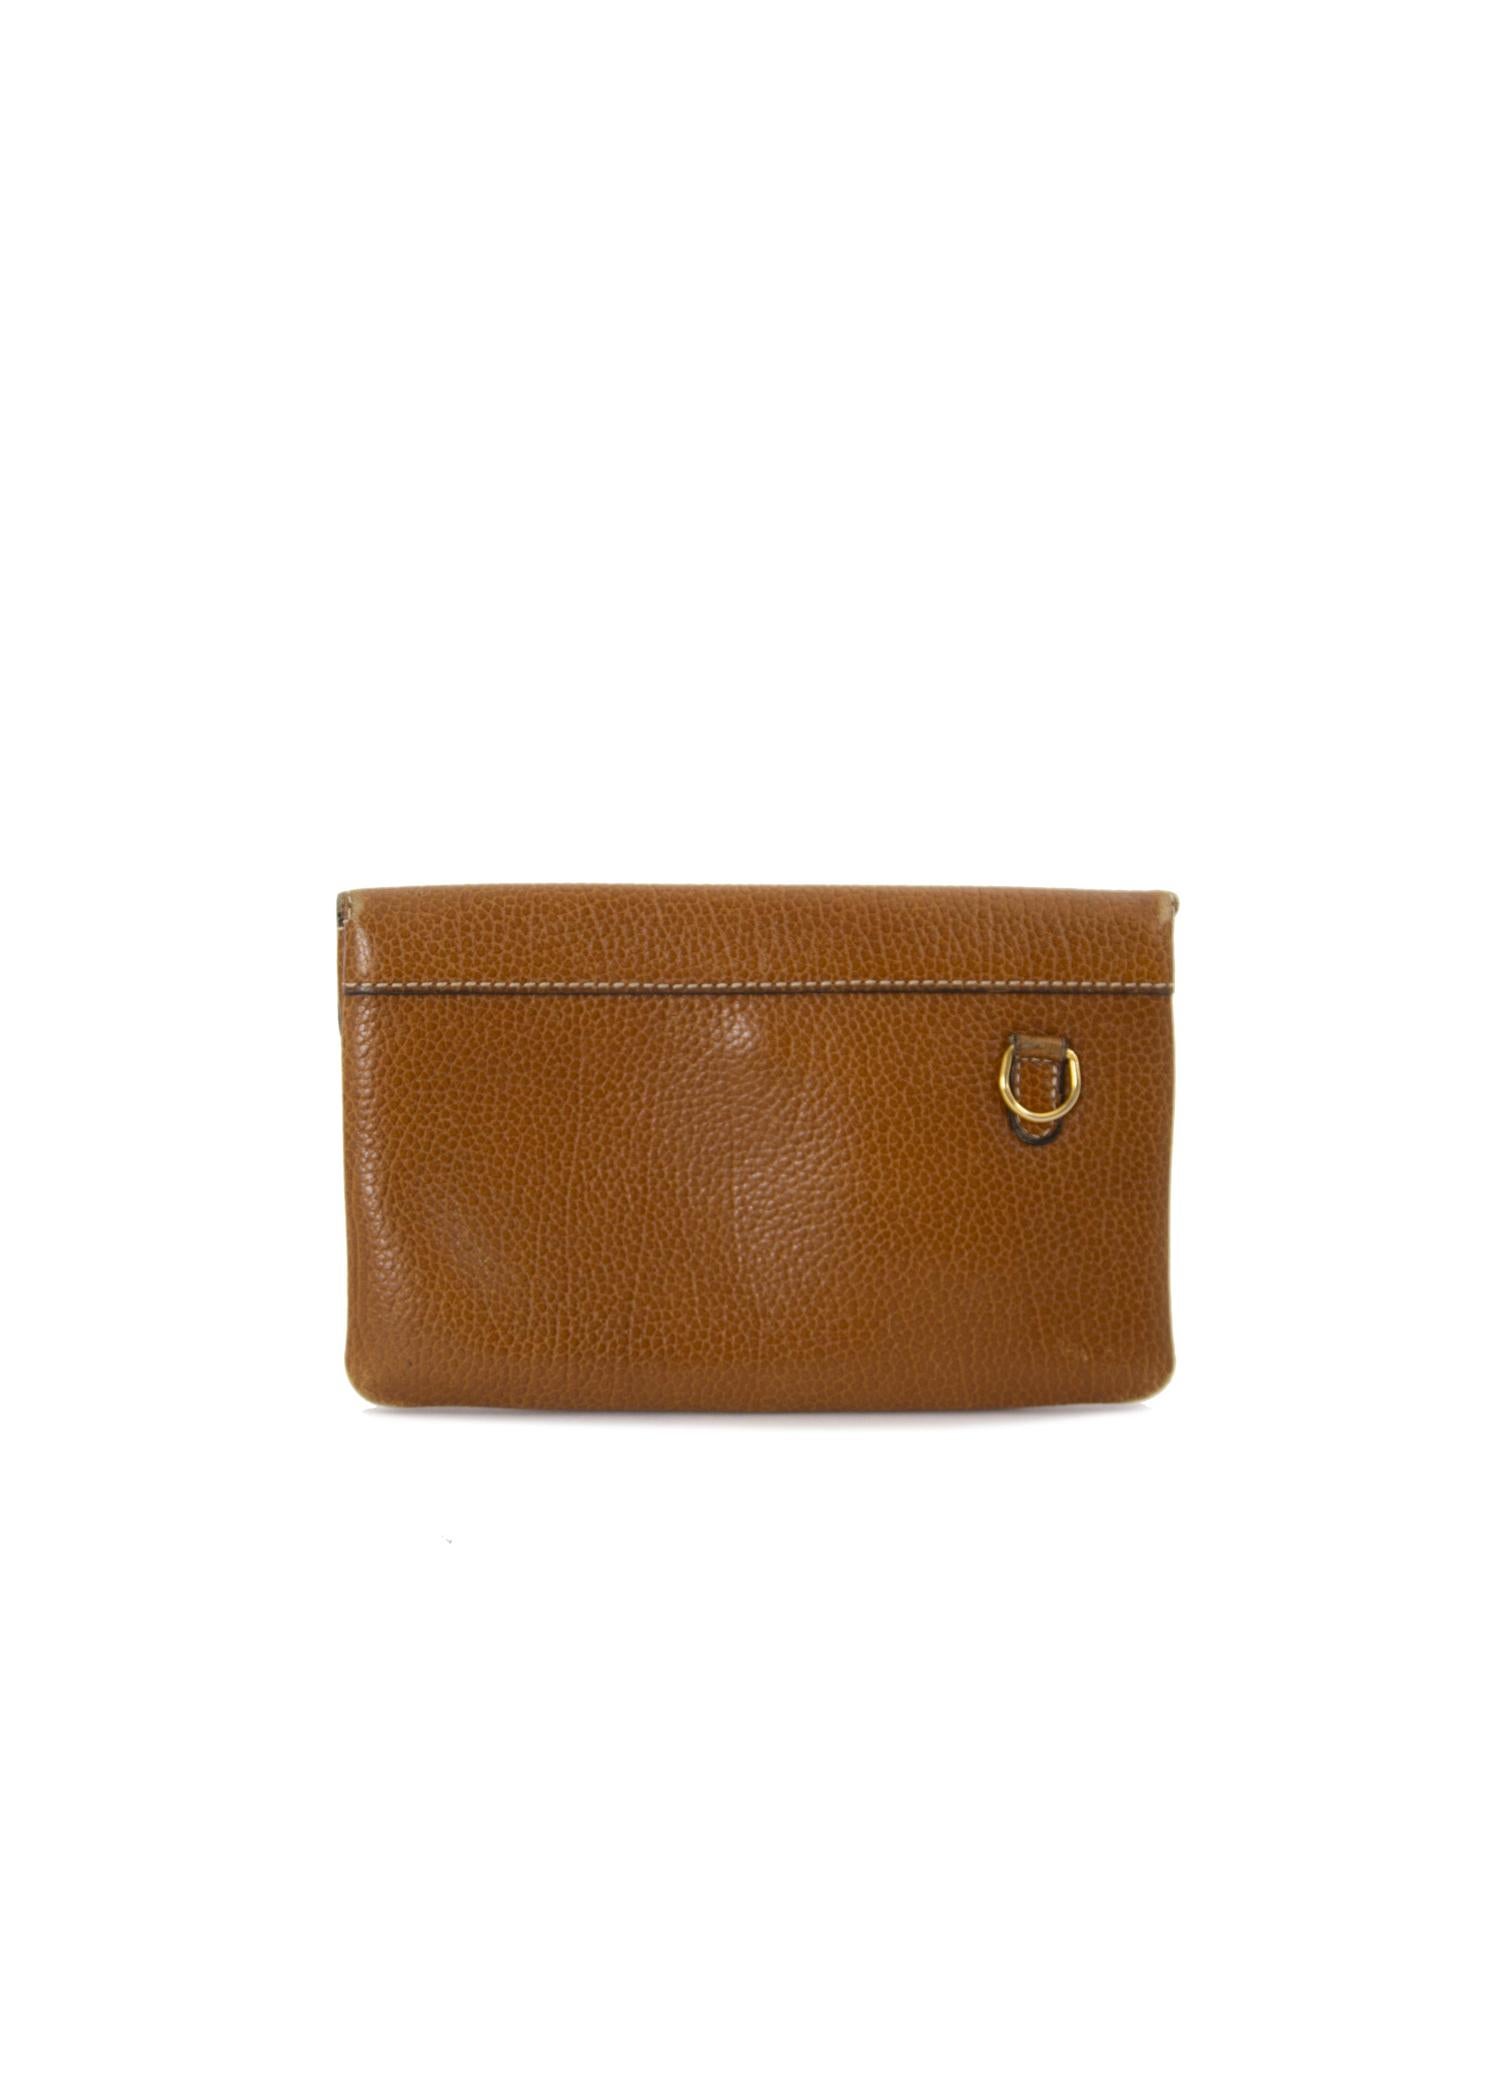 Good vintage condition

Delvaux Brown Leather Pouch

This beautiful Delvaux pouch is crafted from brown leather and features a gold-toned 'D' in the front.
The perfect pouch to keep some money and cards.